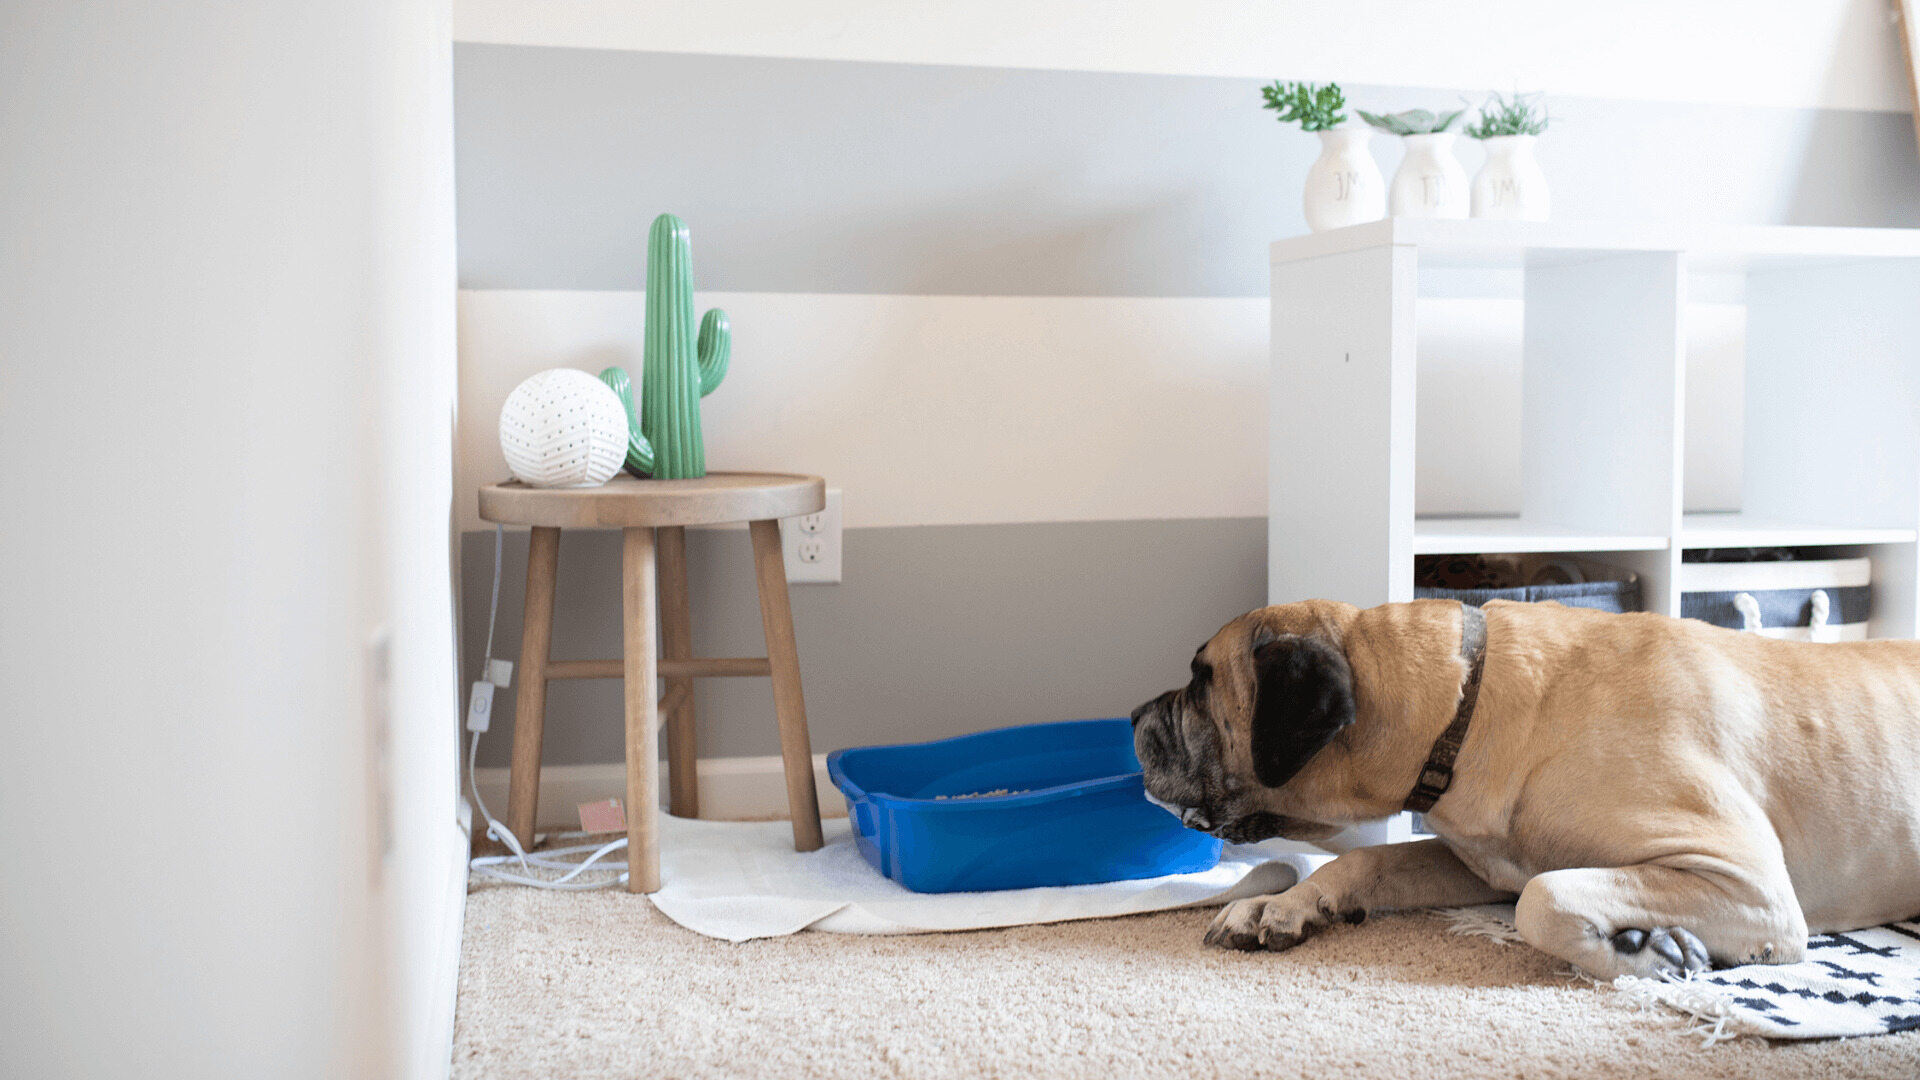 How To Dog-Proof A Litter Box